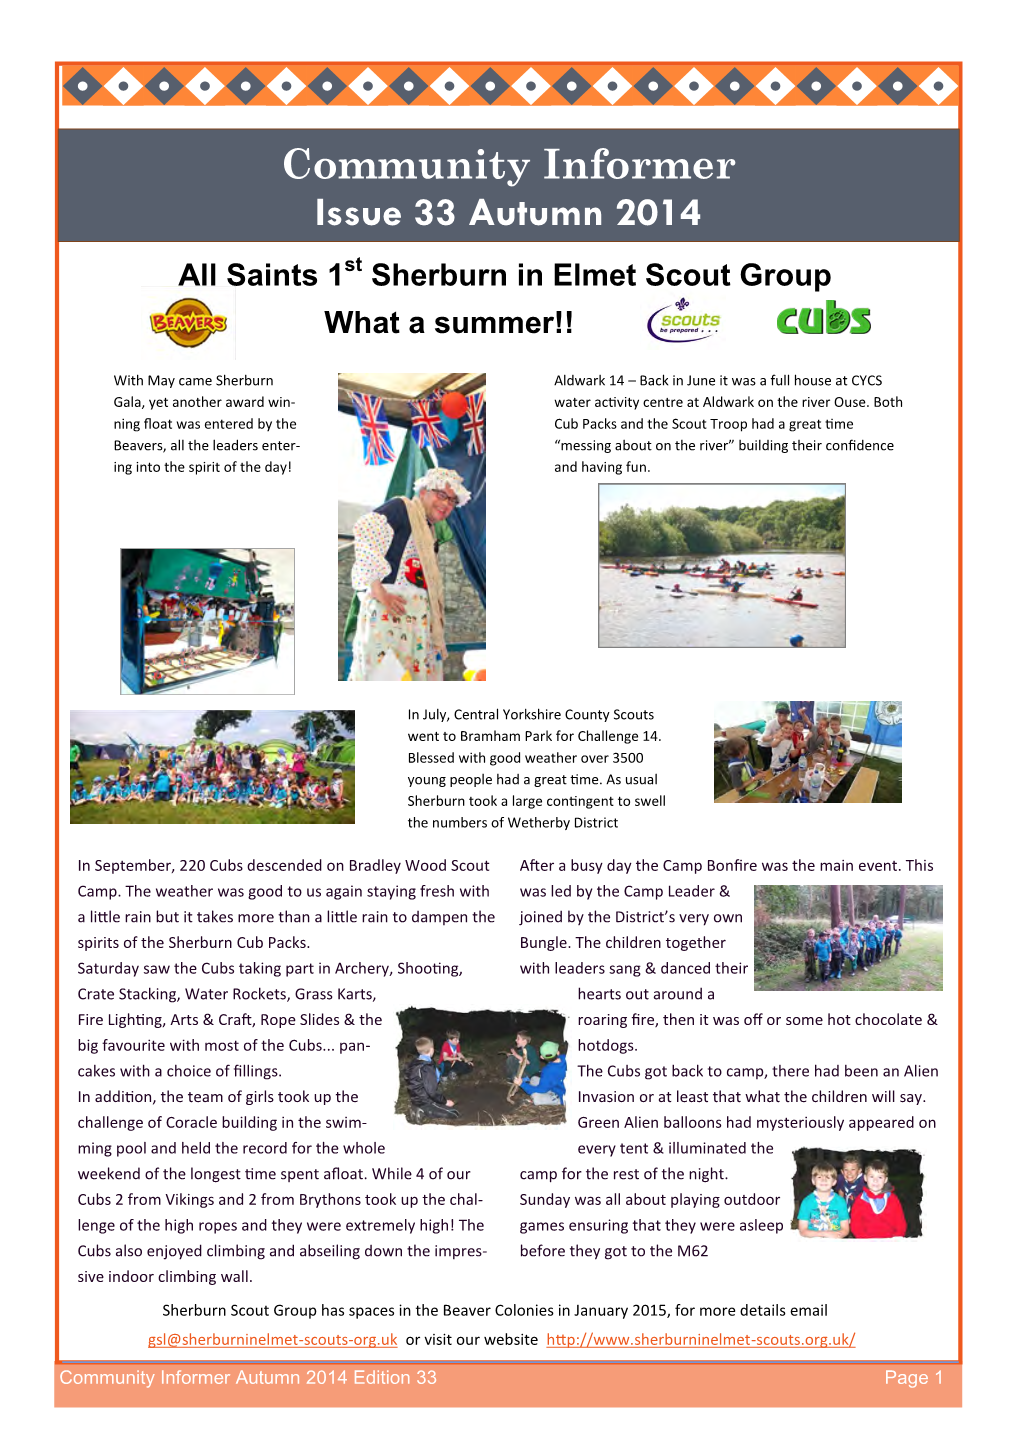 Community Informer Issue 33 Autumn 2014 All Saints 1St Sherburn in Elmet Scout Group What a Summer!!